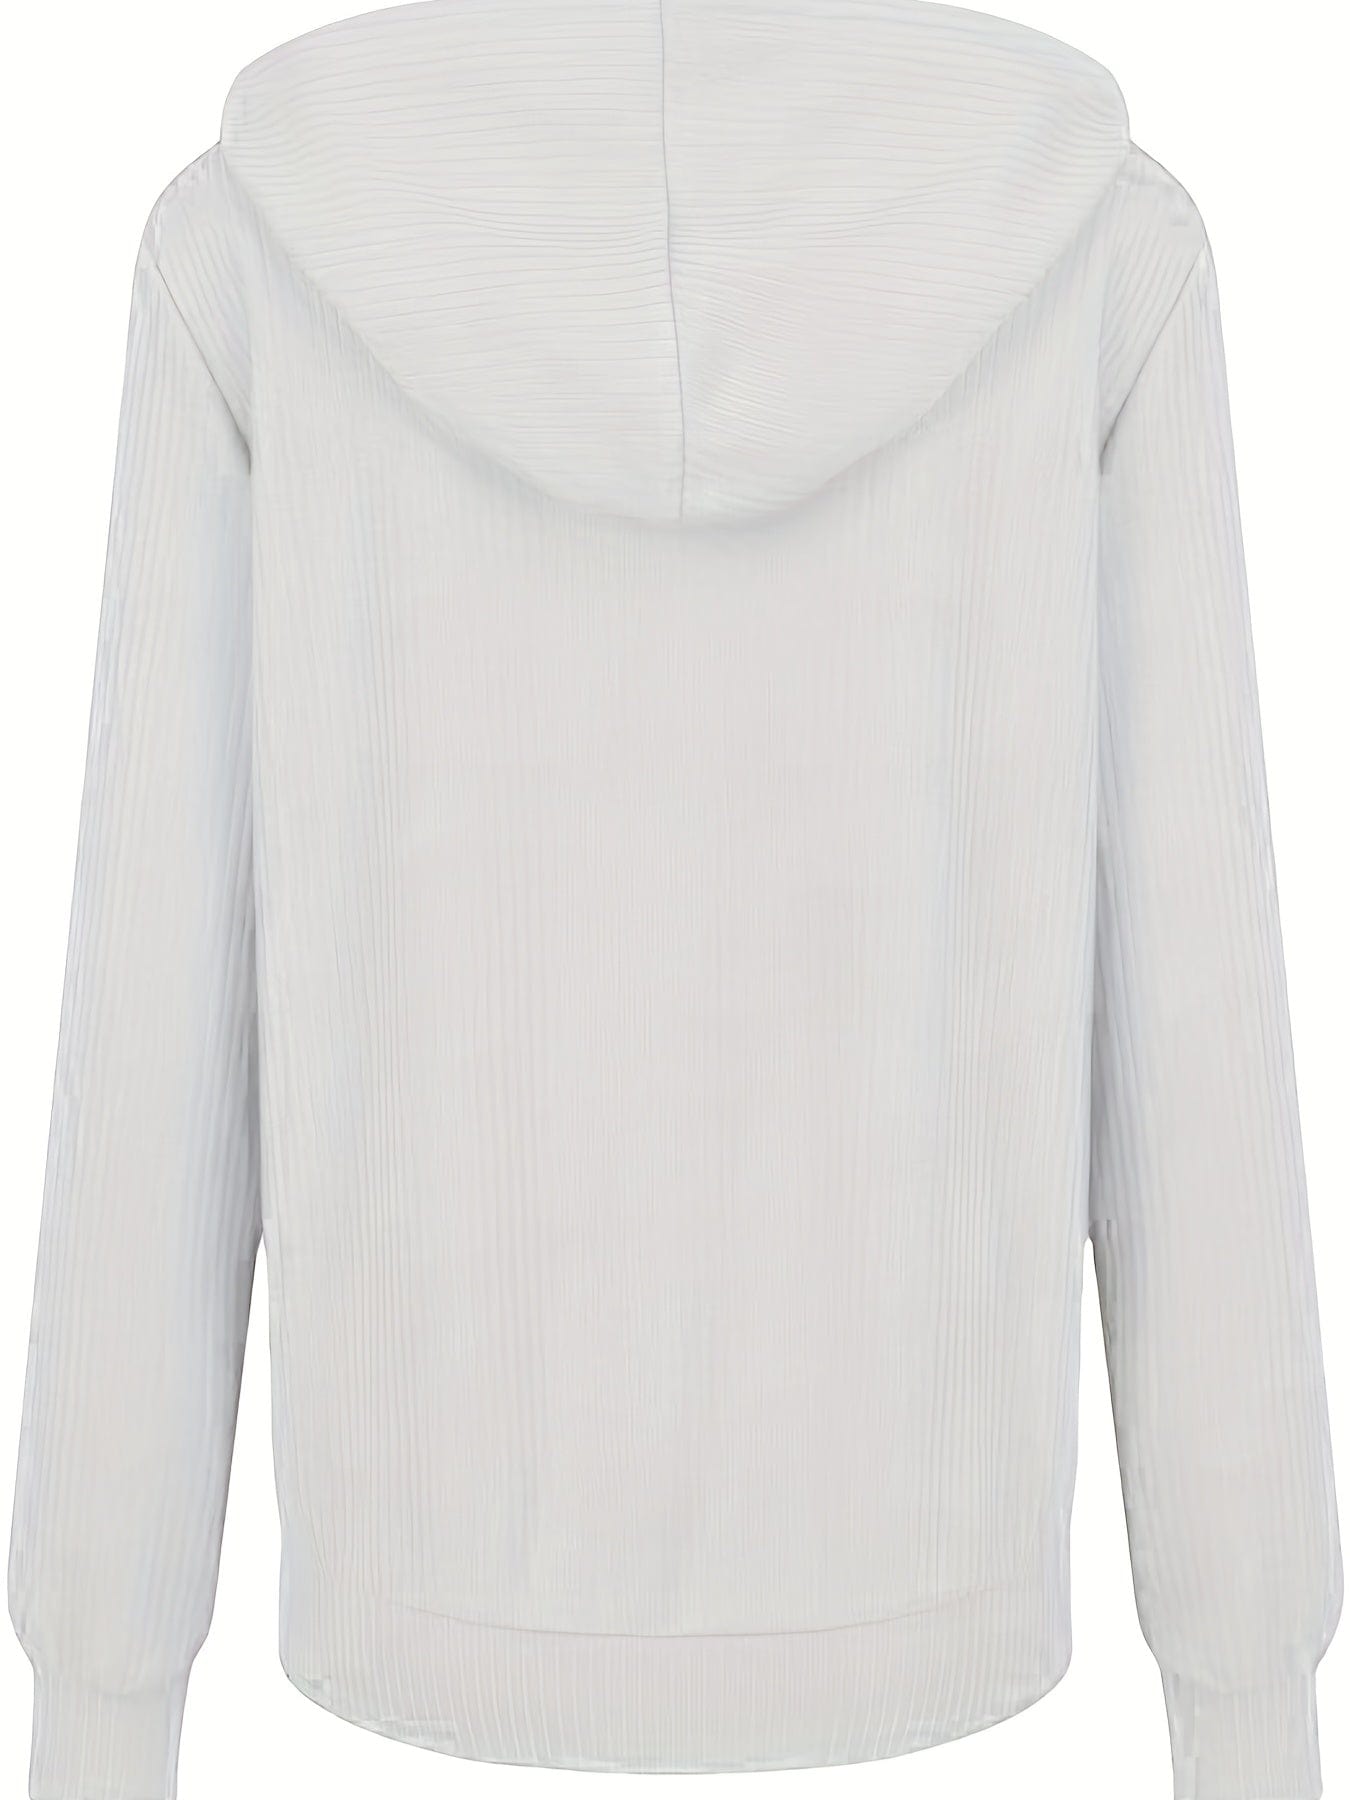 Plus Size Casual Coat, Women's Plus Solid Ribbed Zip Up Long Sleeve Drawstring Hoodie Sweater PLU2309A3506WHT1XL(14) White / 1XL(14)